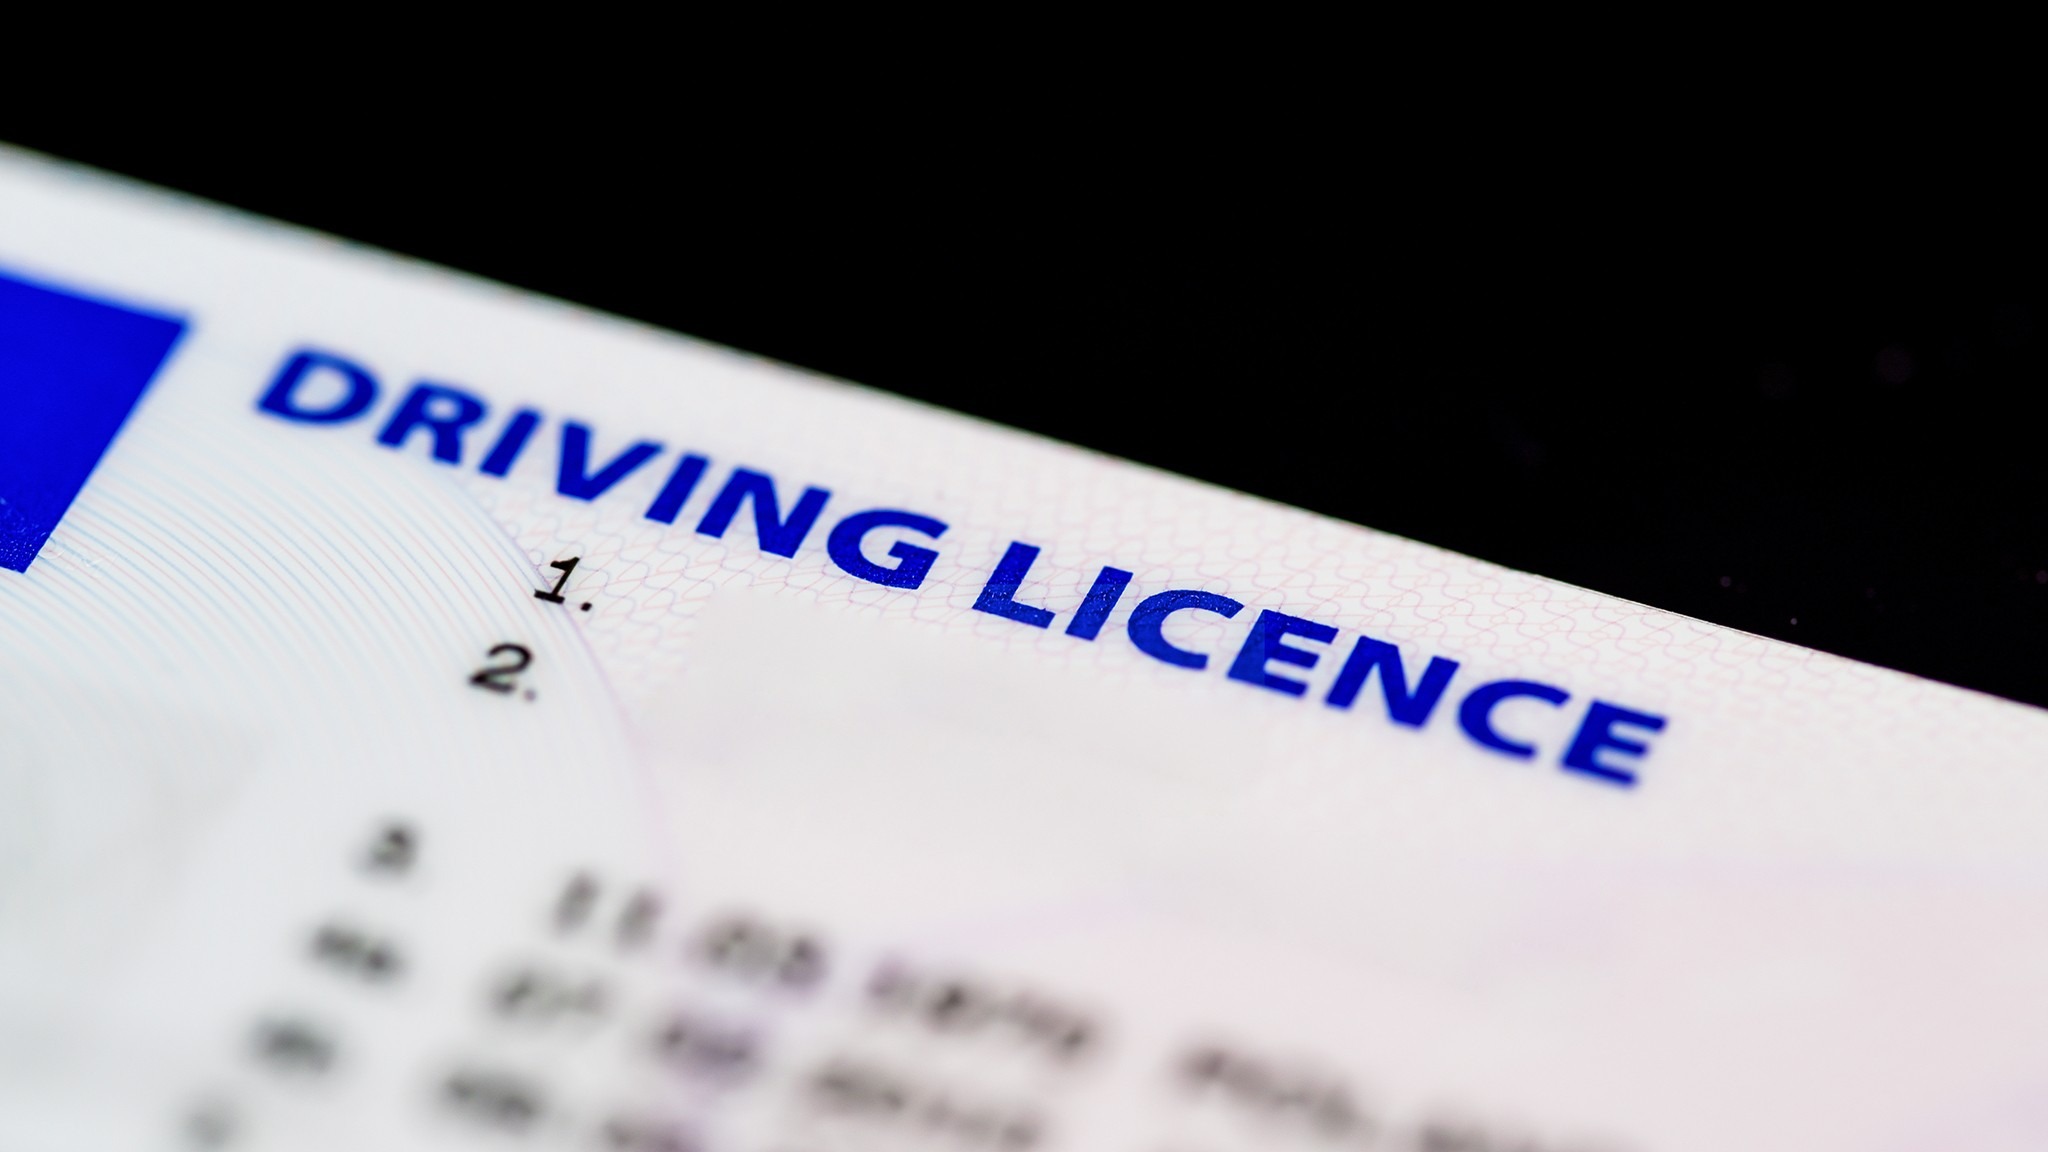 Driving license B78. Next meeting with DG Move on July 11th